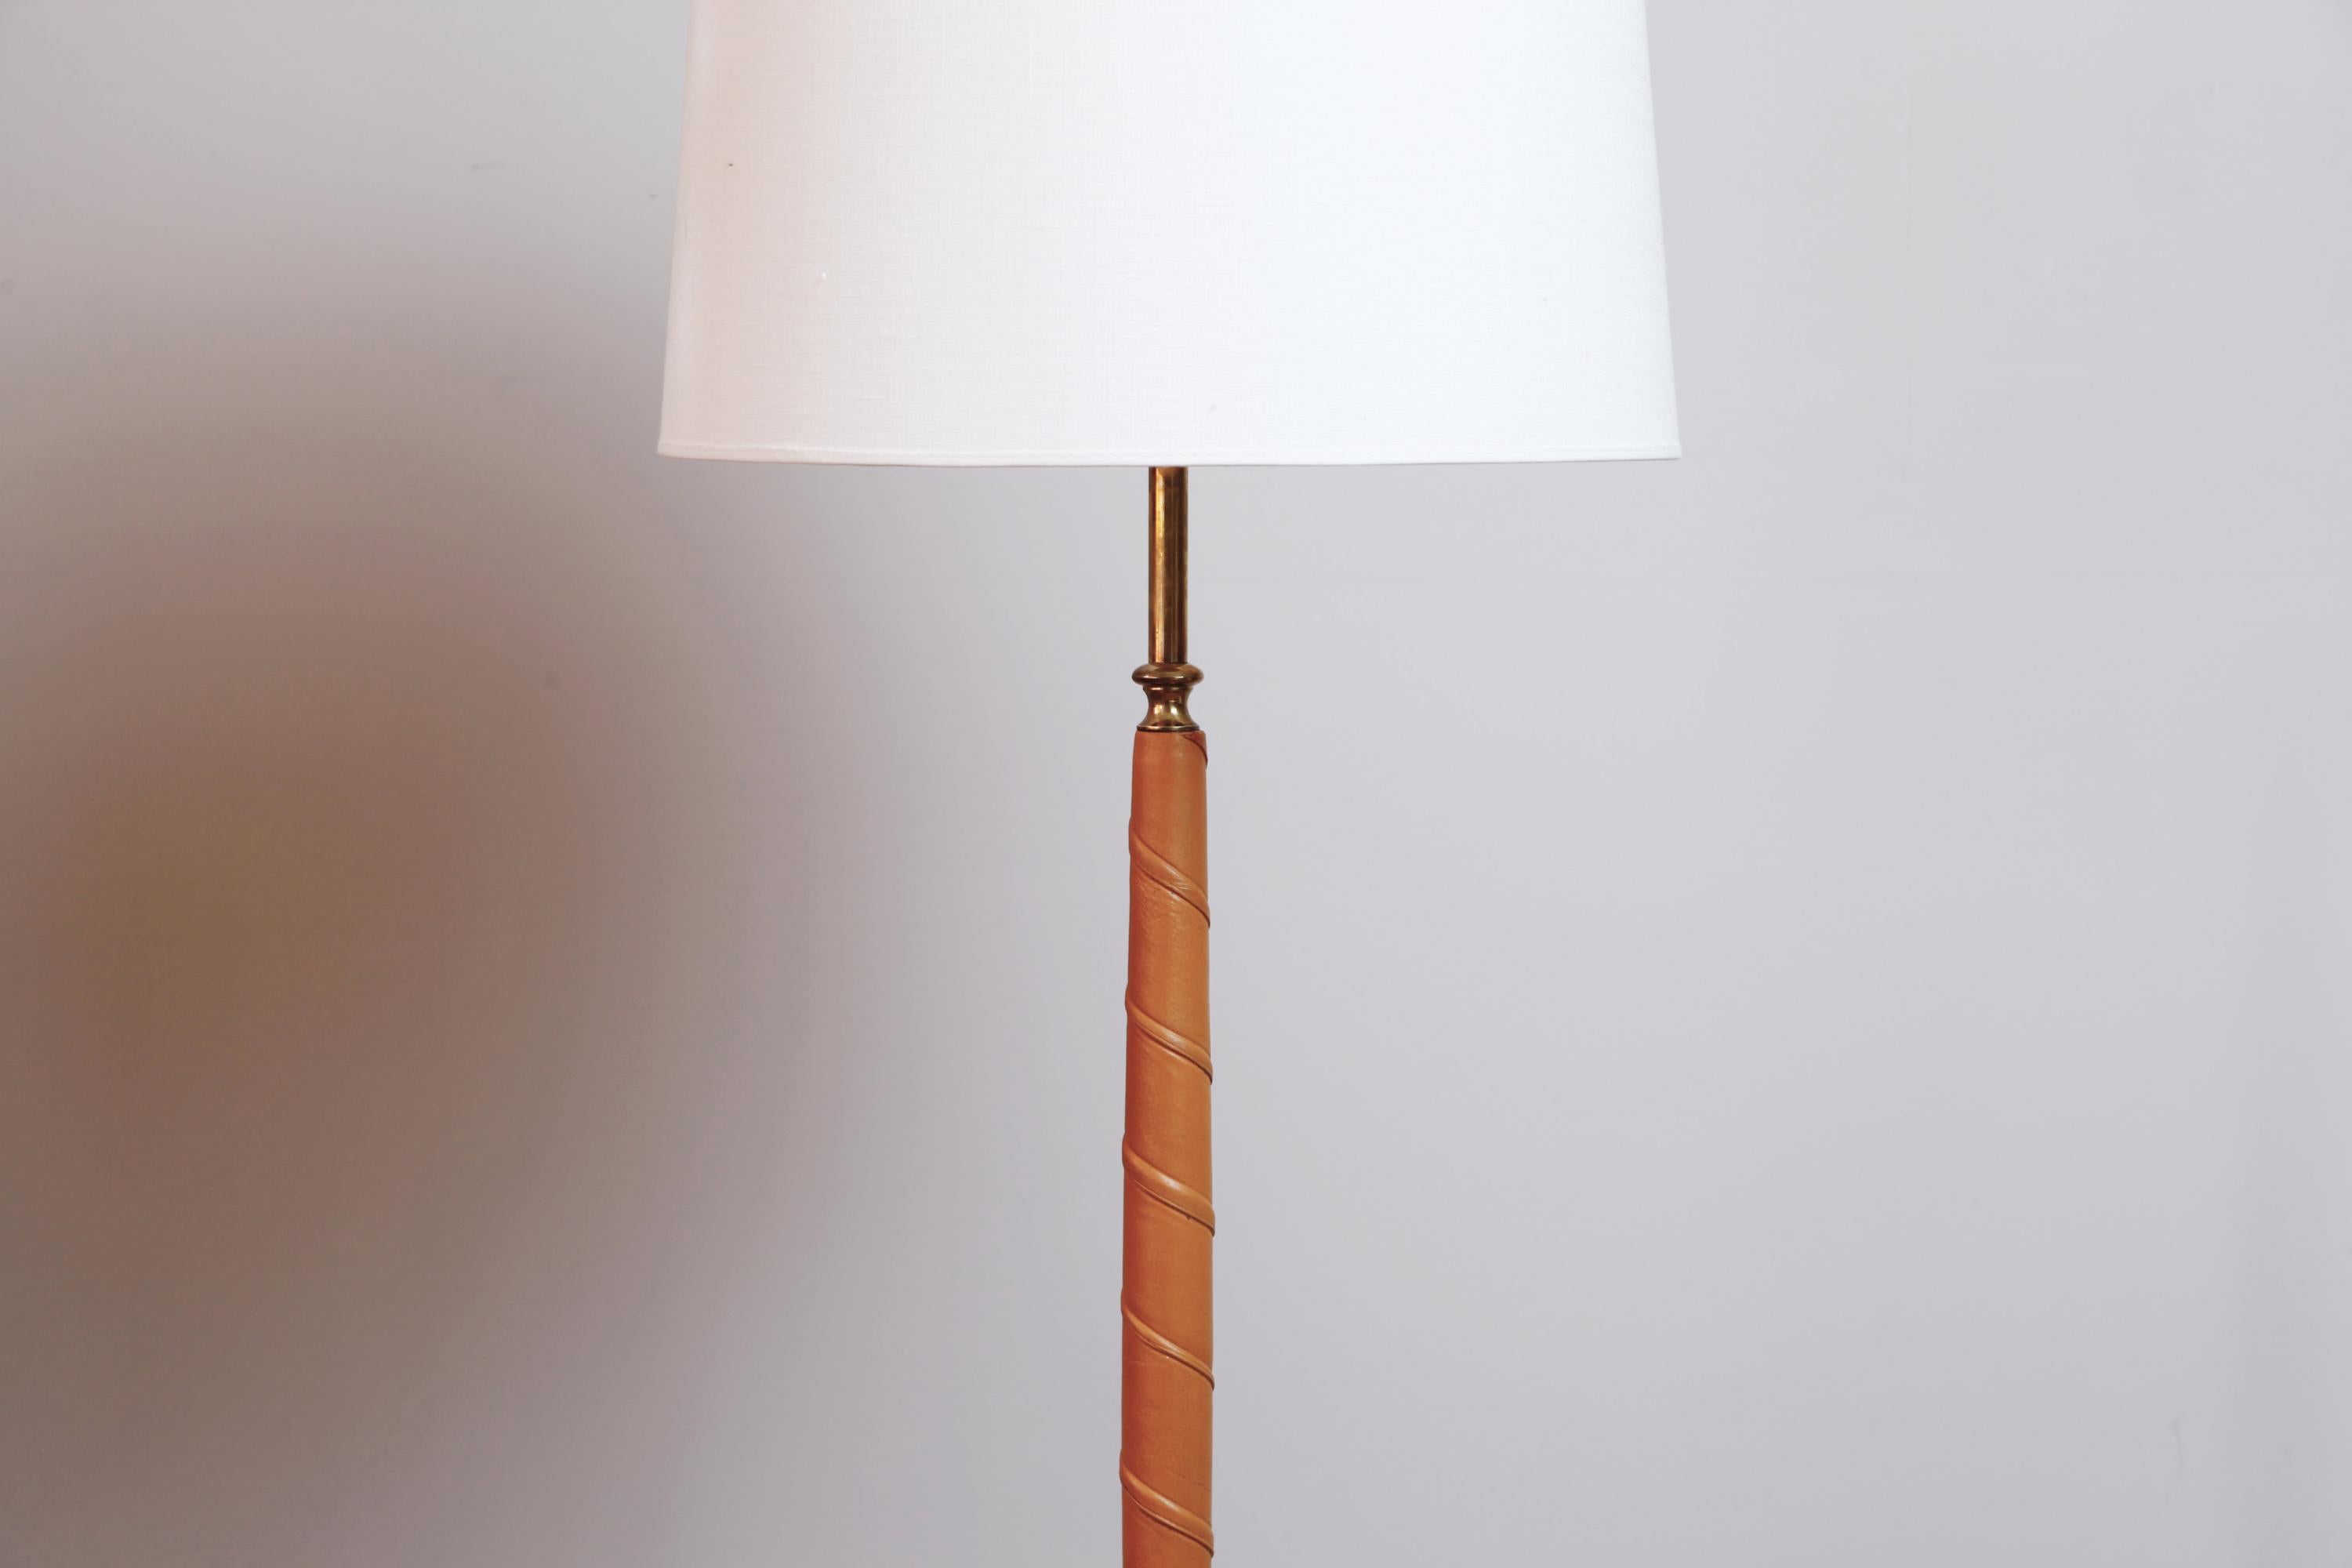 A clean-lined and elegant standing lamp, the leather-wrapped post curving slightly outward toward the middle, in the manner of a Greek Hellenistic period column, and terminating in a brass base.

Rewired for the U.S., shade included. Dimensions of